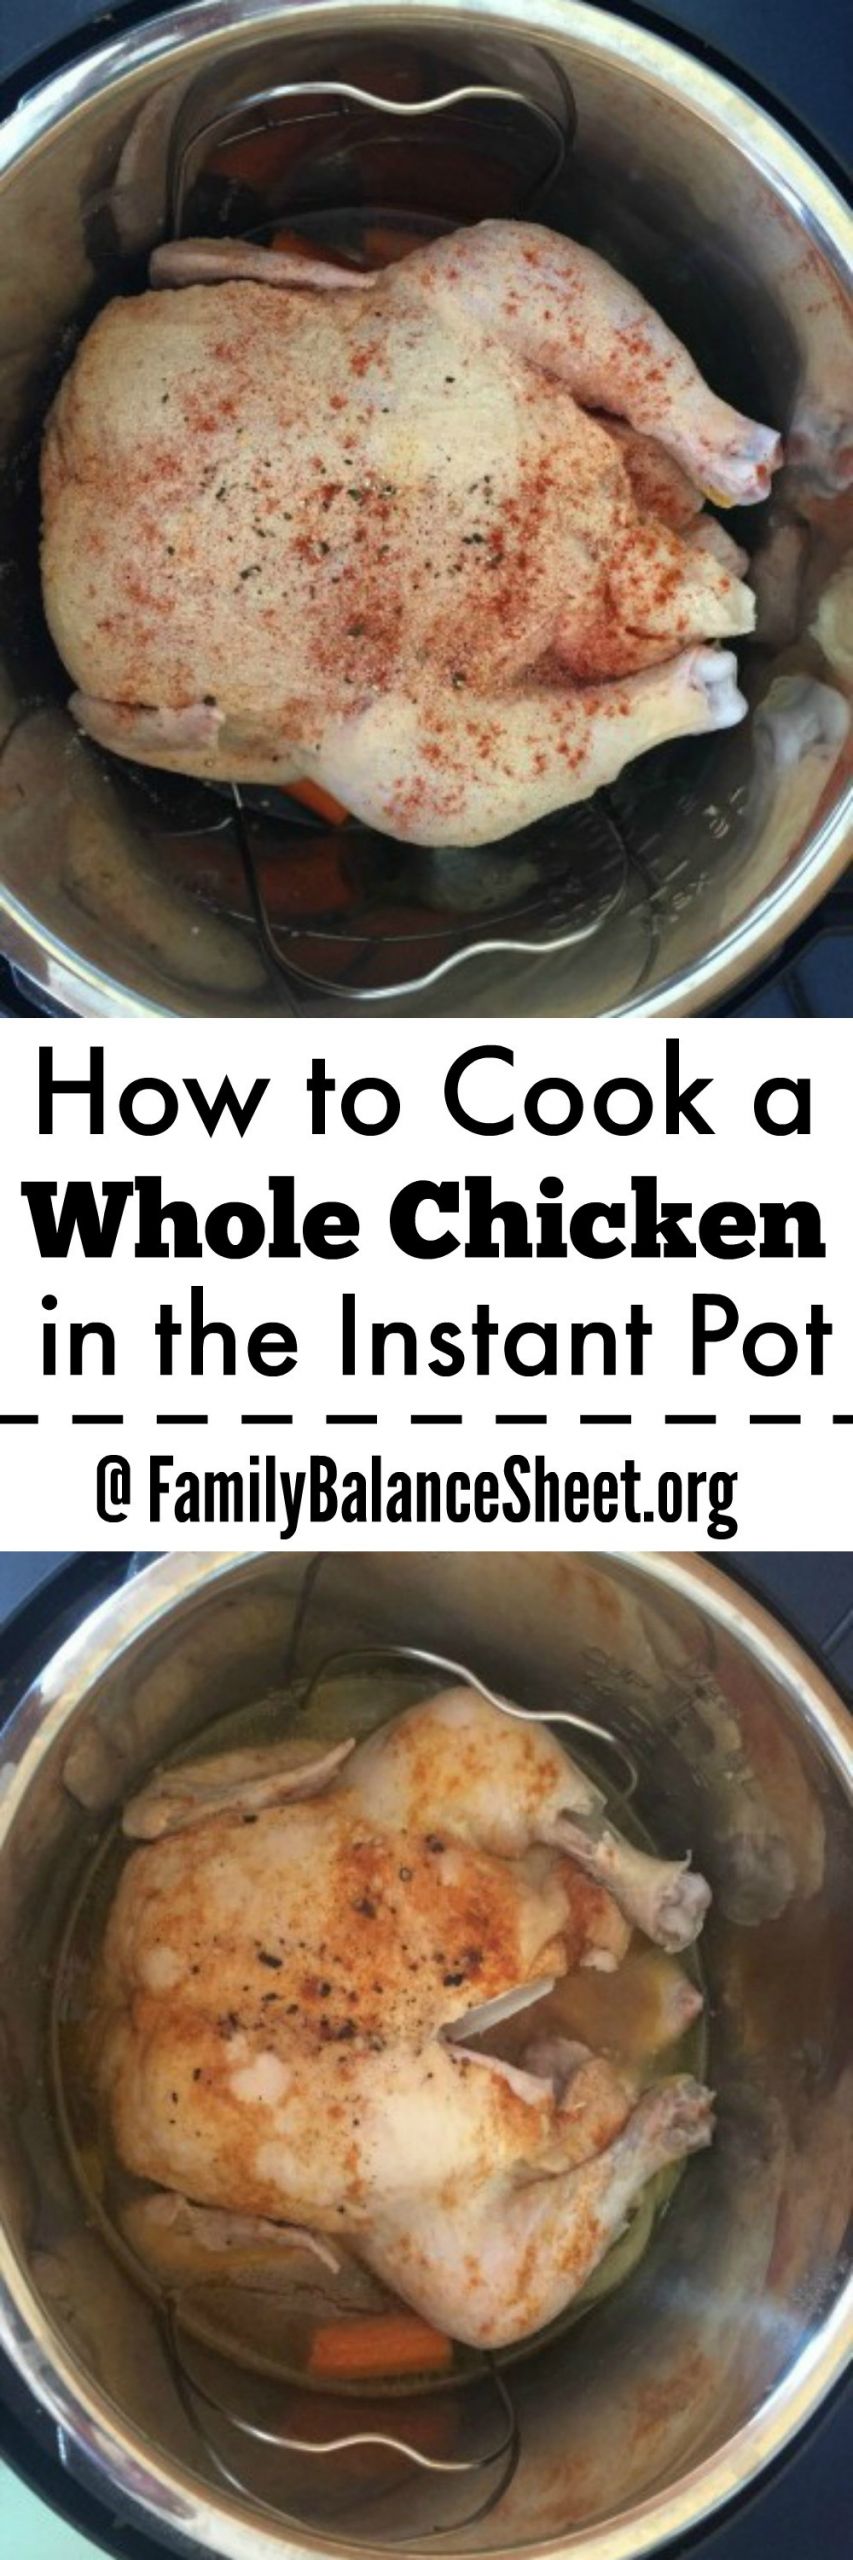 Cooking A Whole Chicken In The Instant Pot
 How to Cook a Whole Chicken in the Instant Pot Family